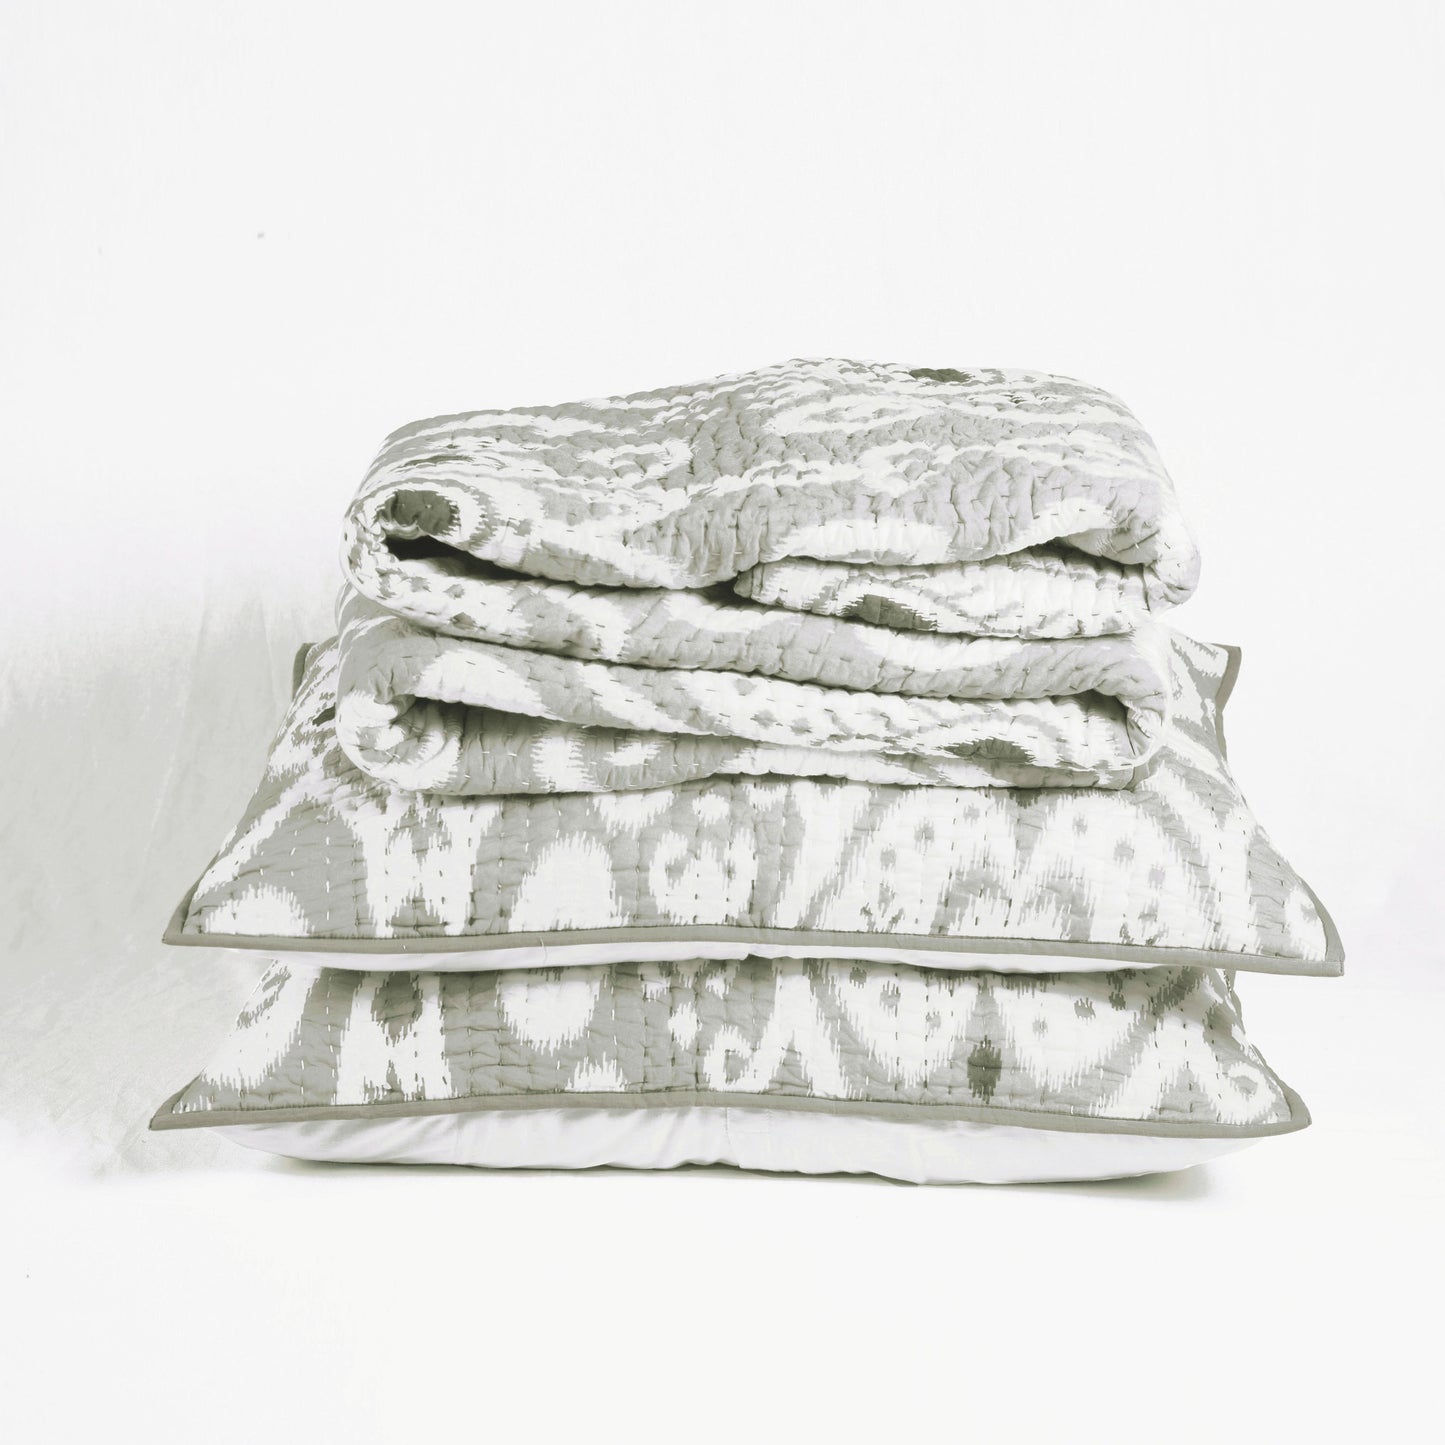 GREY IKAT print Kantha quilt - stripe pattern quilting - Quilt set or Quilt, sizes available